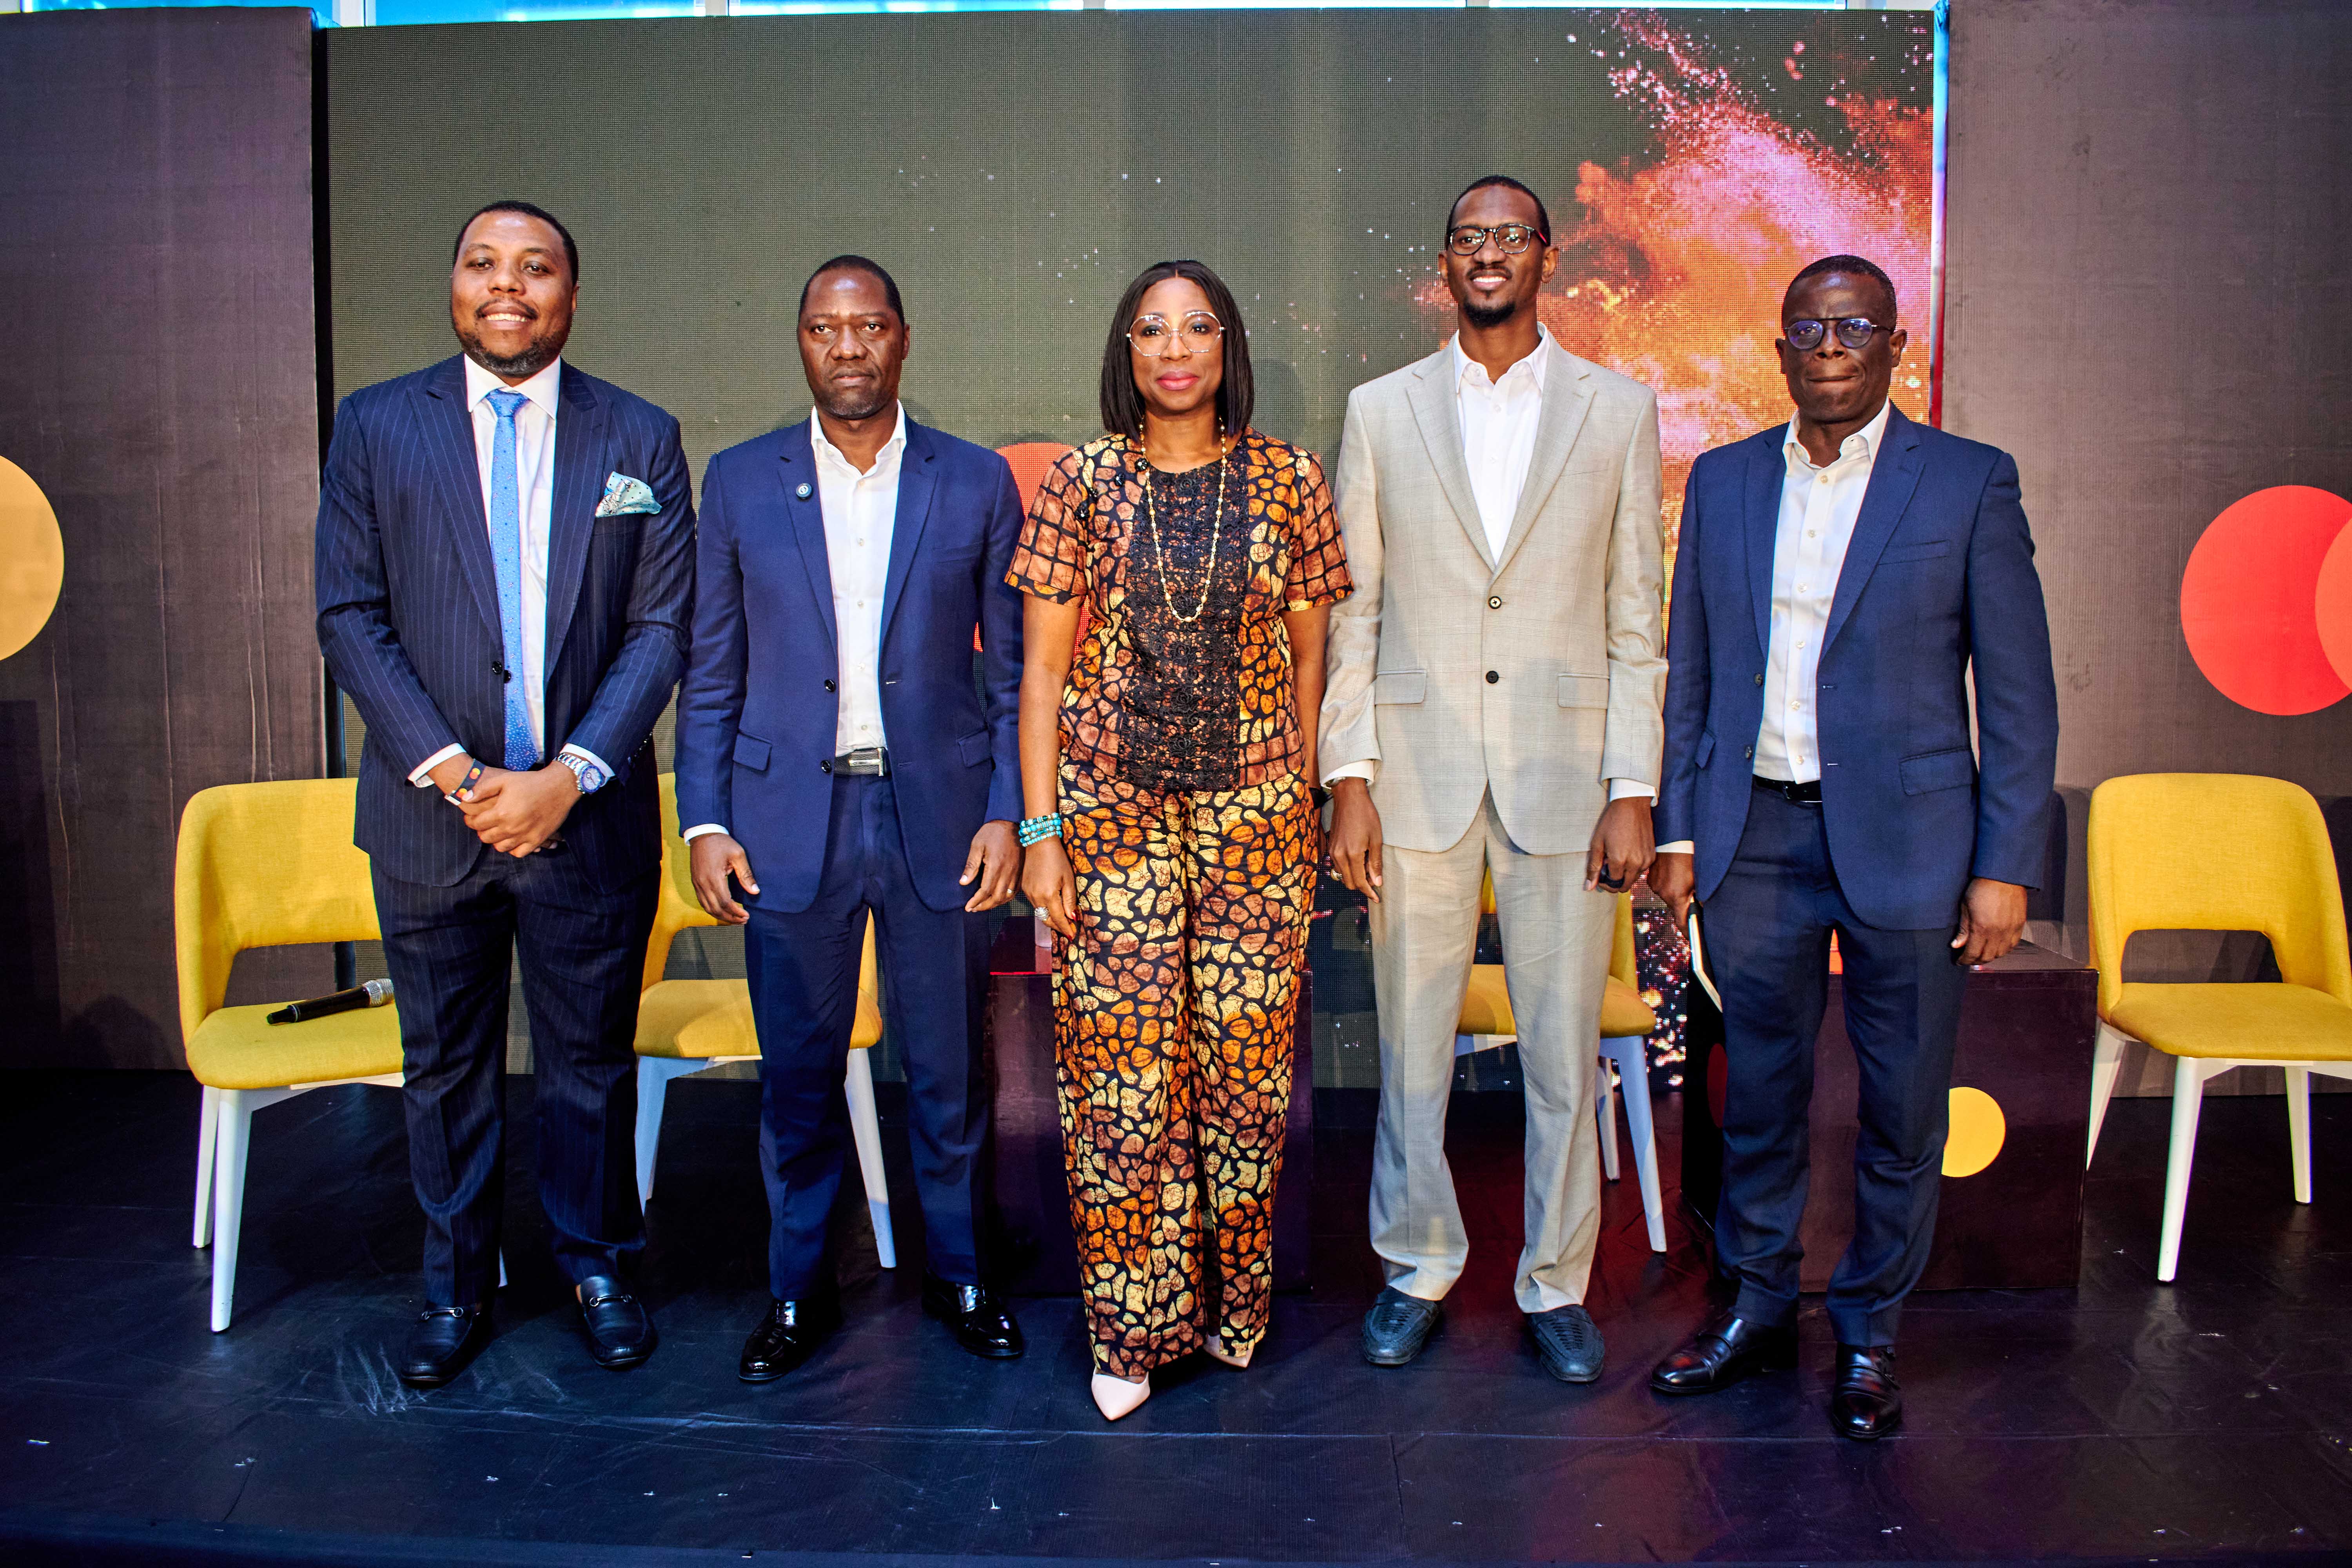 From L-R: Olumide Soyombo, Co-founder, Bluechip Technologies Ltd and Voltron Capital; Adeoye Ojuroye, Executive Director and Chief Financial Officer, Providus Bank; Folasade Femi-Lawal, Country Manager, West Africa, Mastercard; Nasir Yammama, Senior Special Assistant to the President on Innovation; Olu Akanmu, CEO and Board Advisor, Phillips & Samuel Ltd, at the 2024 Mastercard Fintech Forum in Lagos on March 20, 2024.